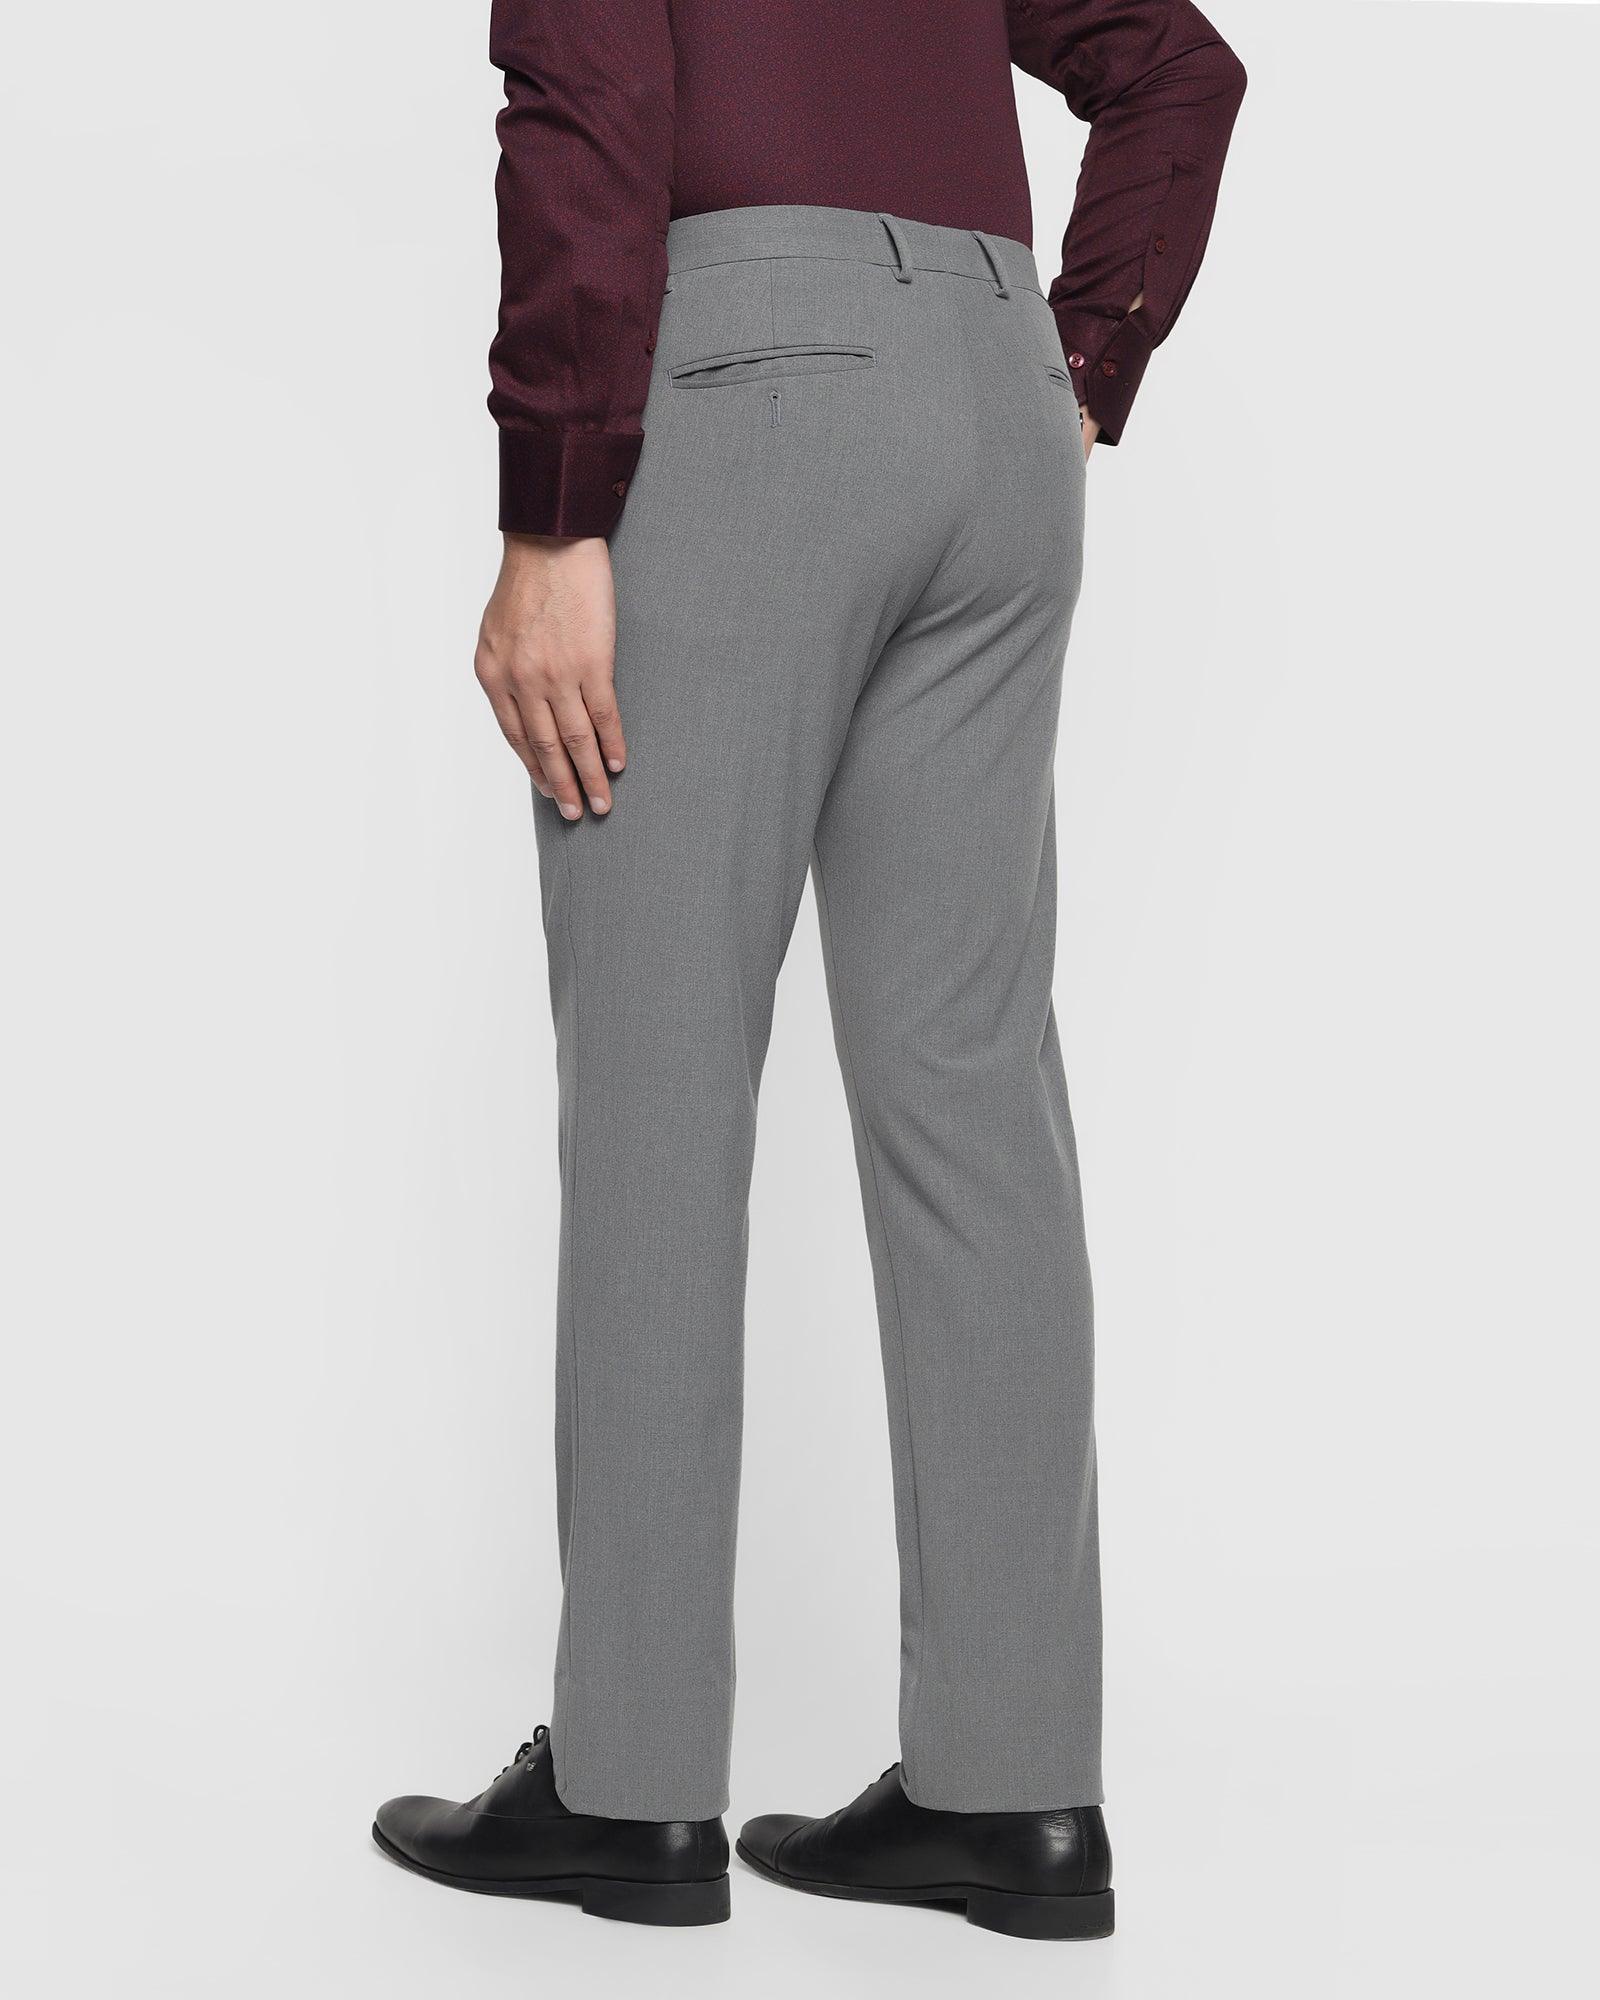 Buy Arrow Flat Front Textured Formal Trousers - NNNOW.com